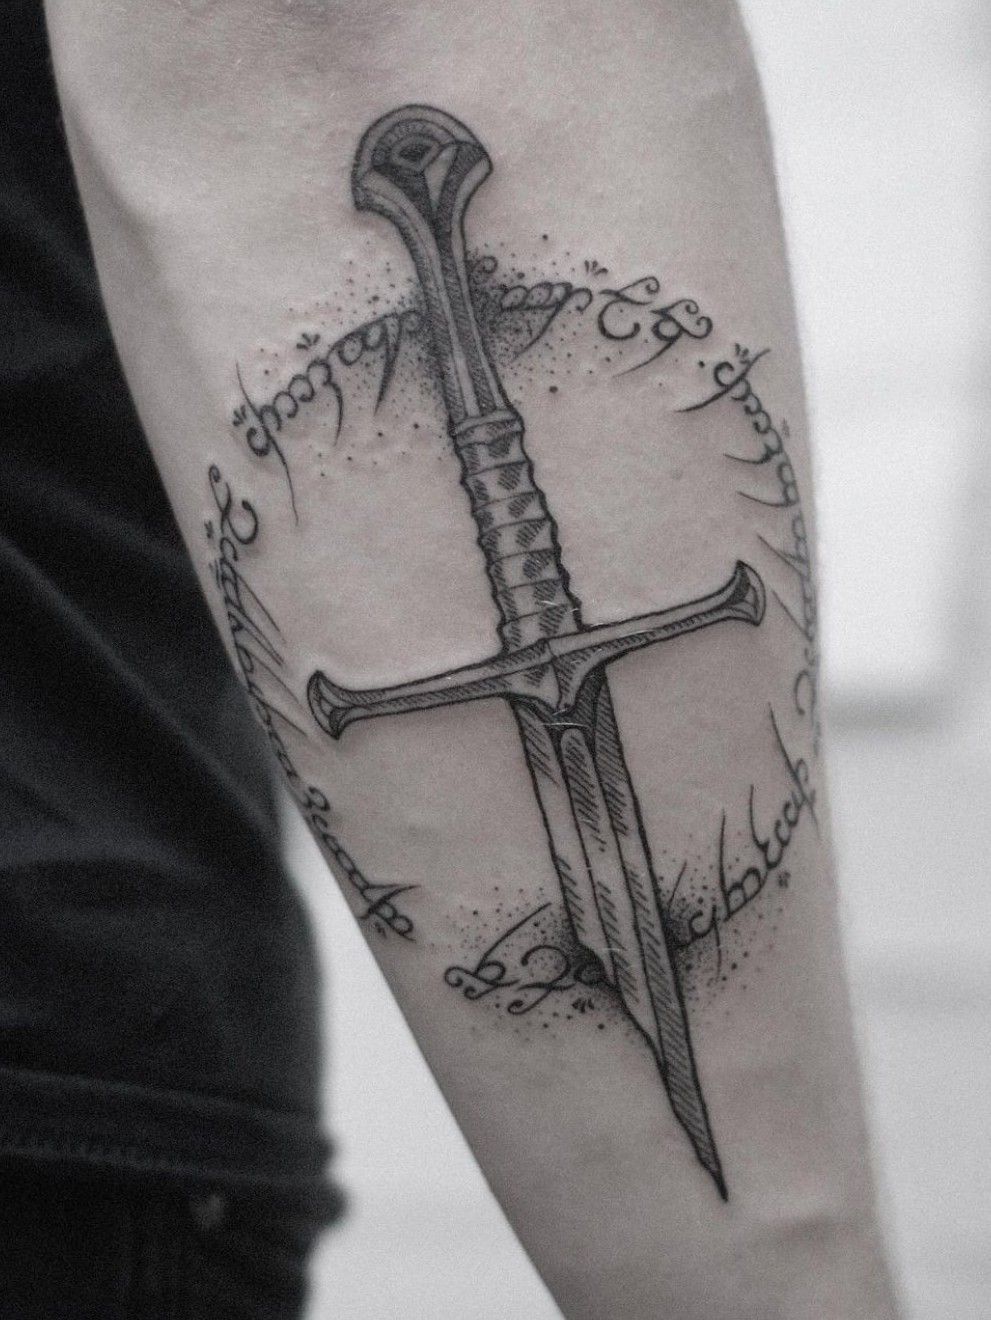 LOTR Narsil Sword done by Alexandra at Valiant Inscriptions in Asheville  NC  rtattoos